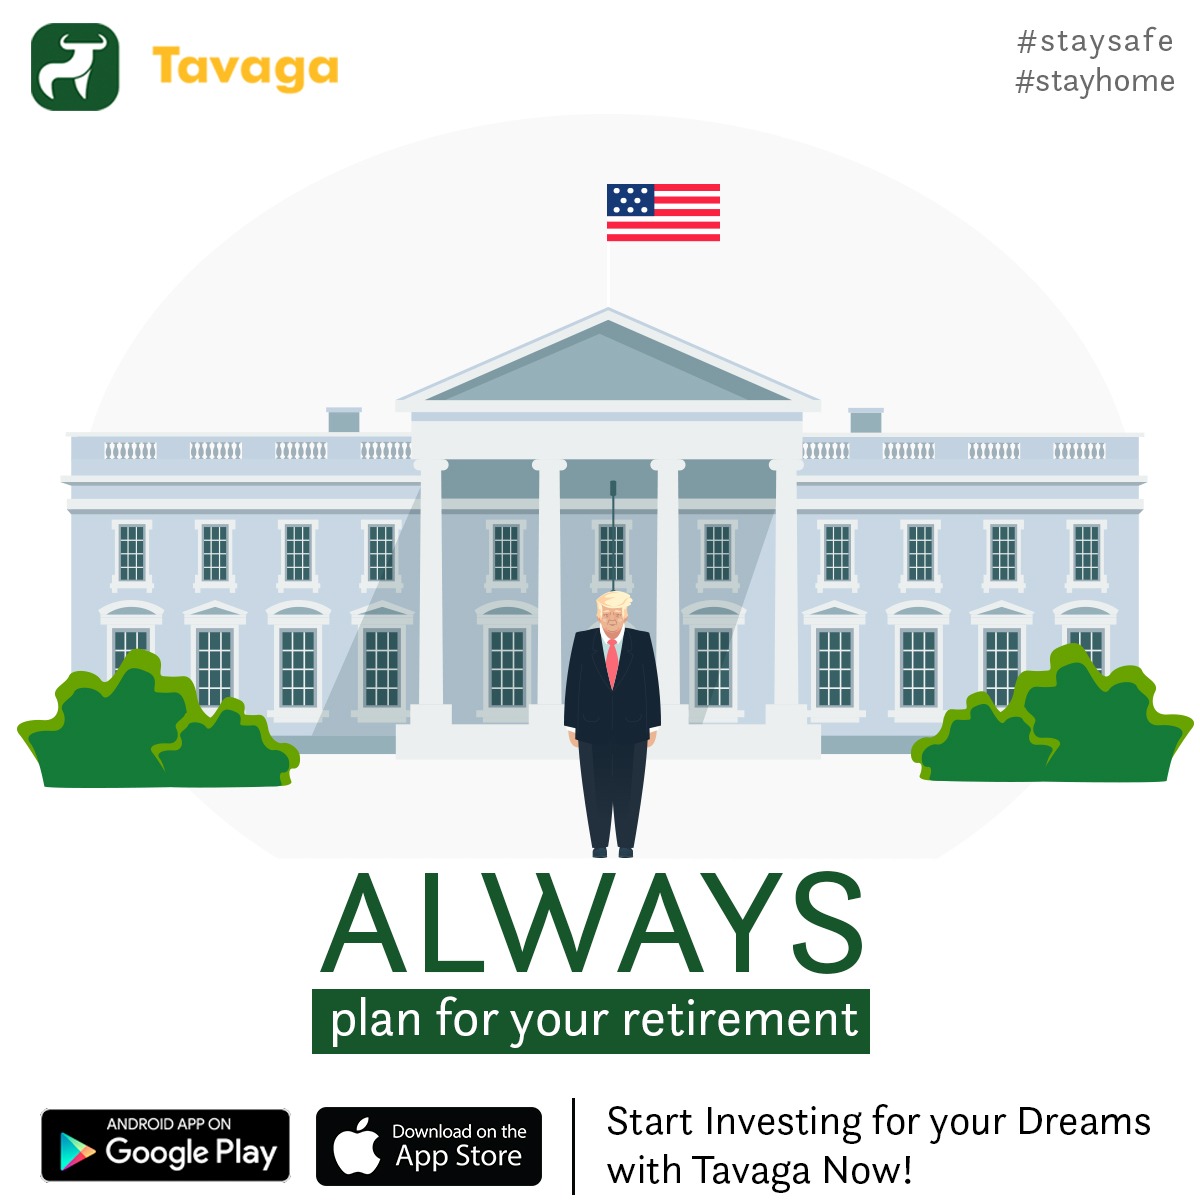 ALWAYS Plan For Your Retirement Download Tavaga Mobile Applications and start NOW Google Play Store: bit.ly/1PcUQrV iOS: apple.co/2kMhYsh #HappyInvesting